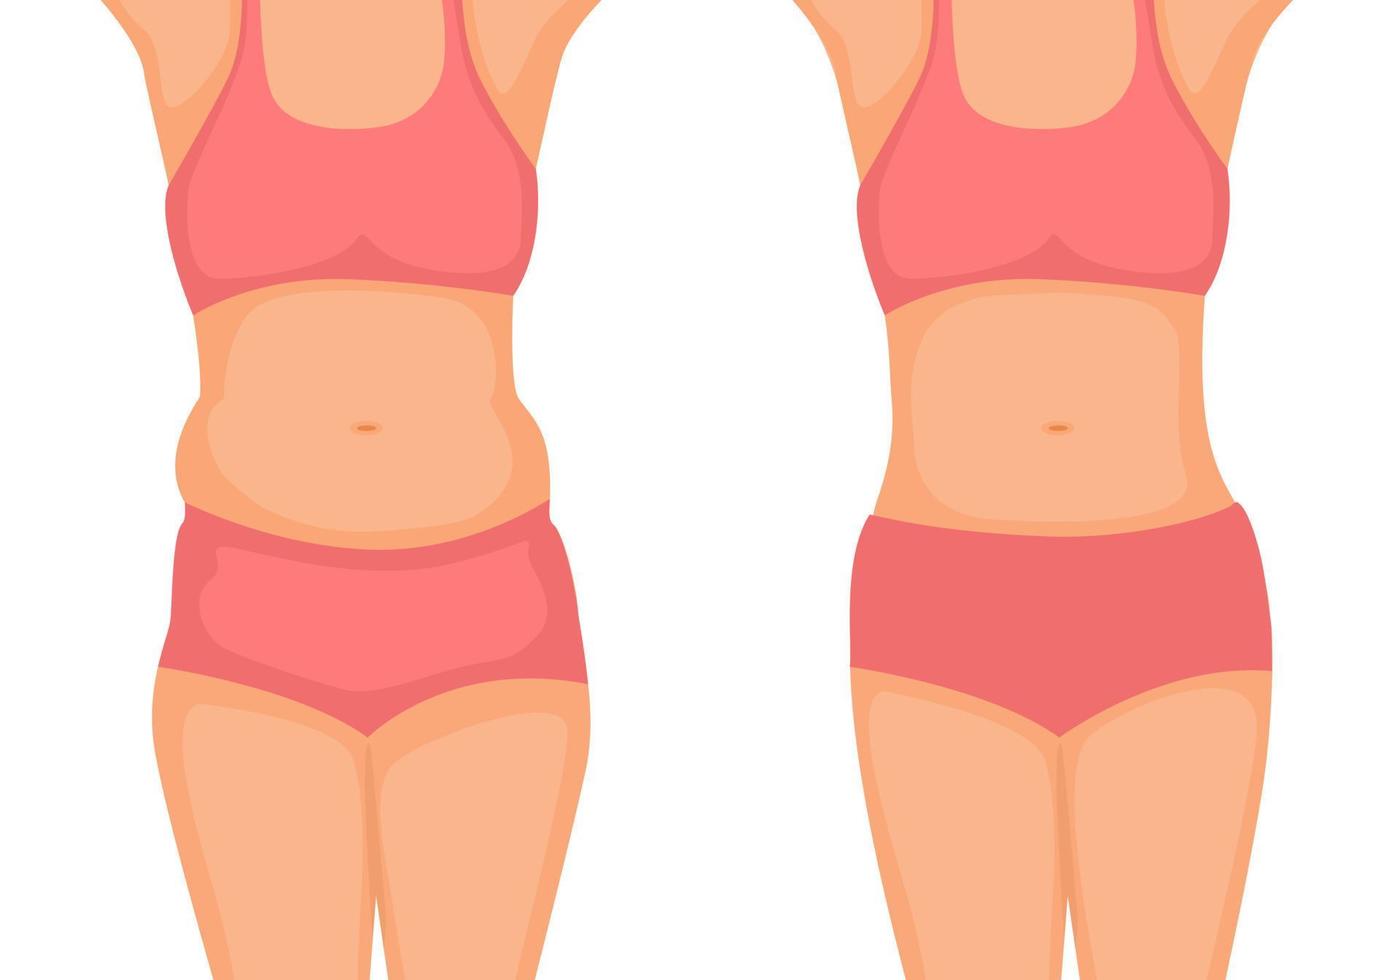 young woman body Before and After weight loss showing from fat to slim belly fat concept vector